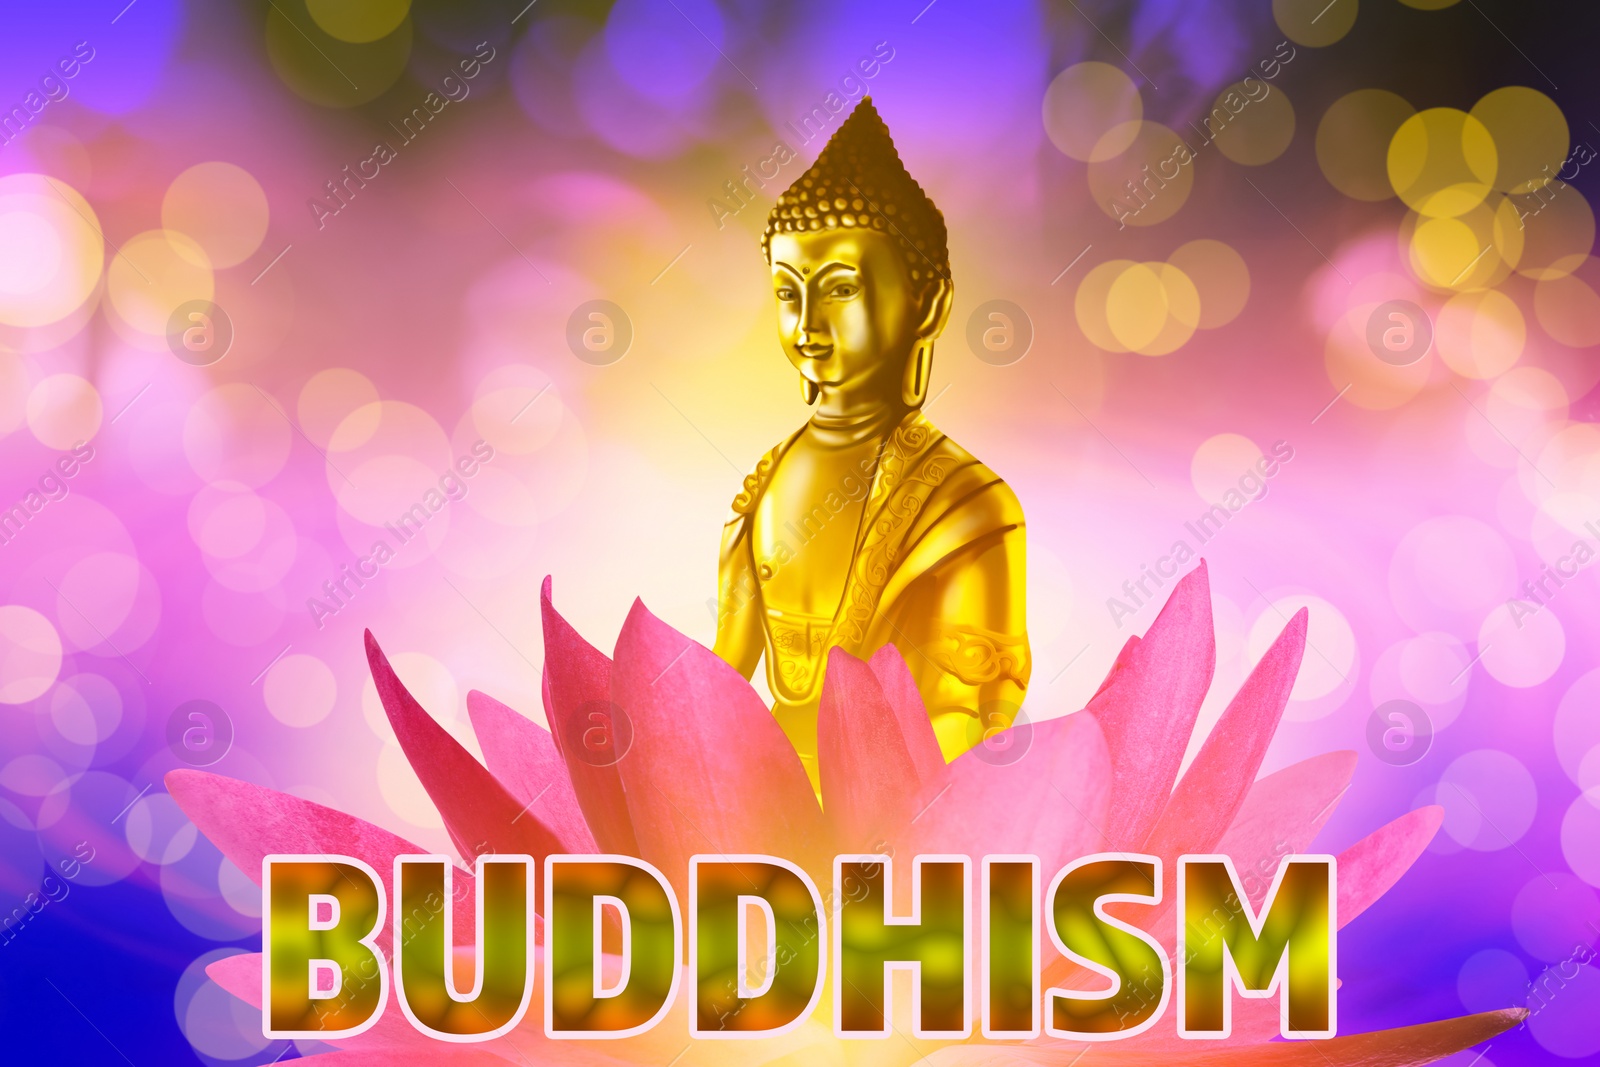 Image of Buddhism. Golden Buddha figure in lotus flower on bright background